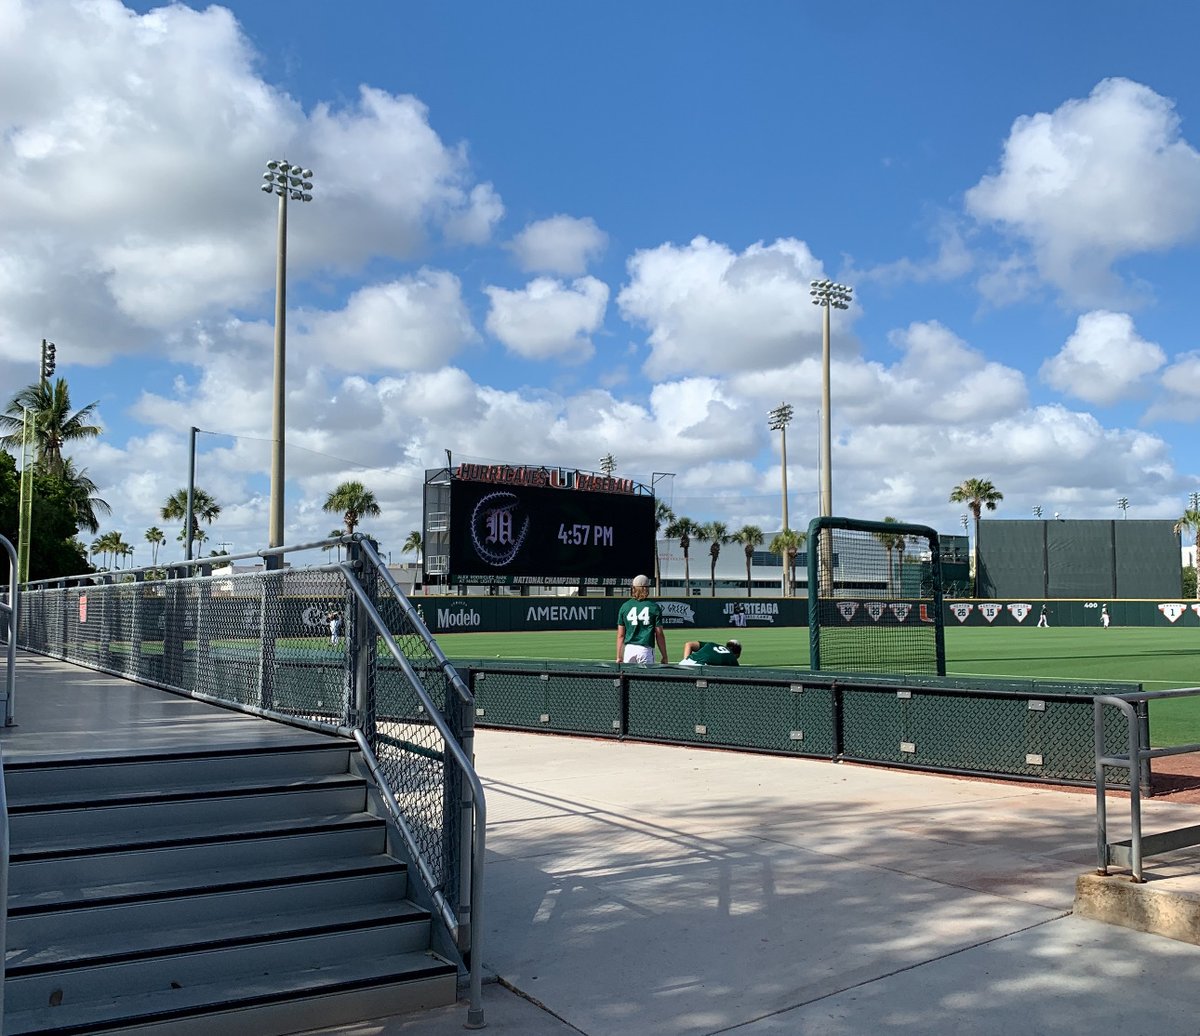 Excited to renew our partnership with the @MiamiHurricanes! Had a great visit to The U this week for some athlete education and discussions on the evolving college athletics landscape. The Canes are equipped for a successful road ahead!